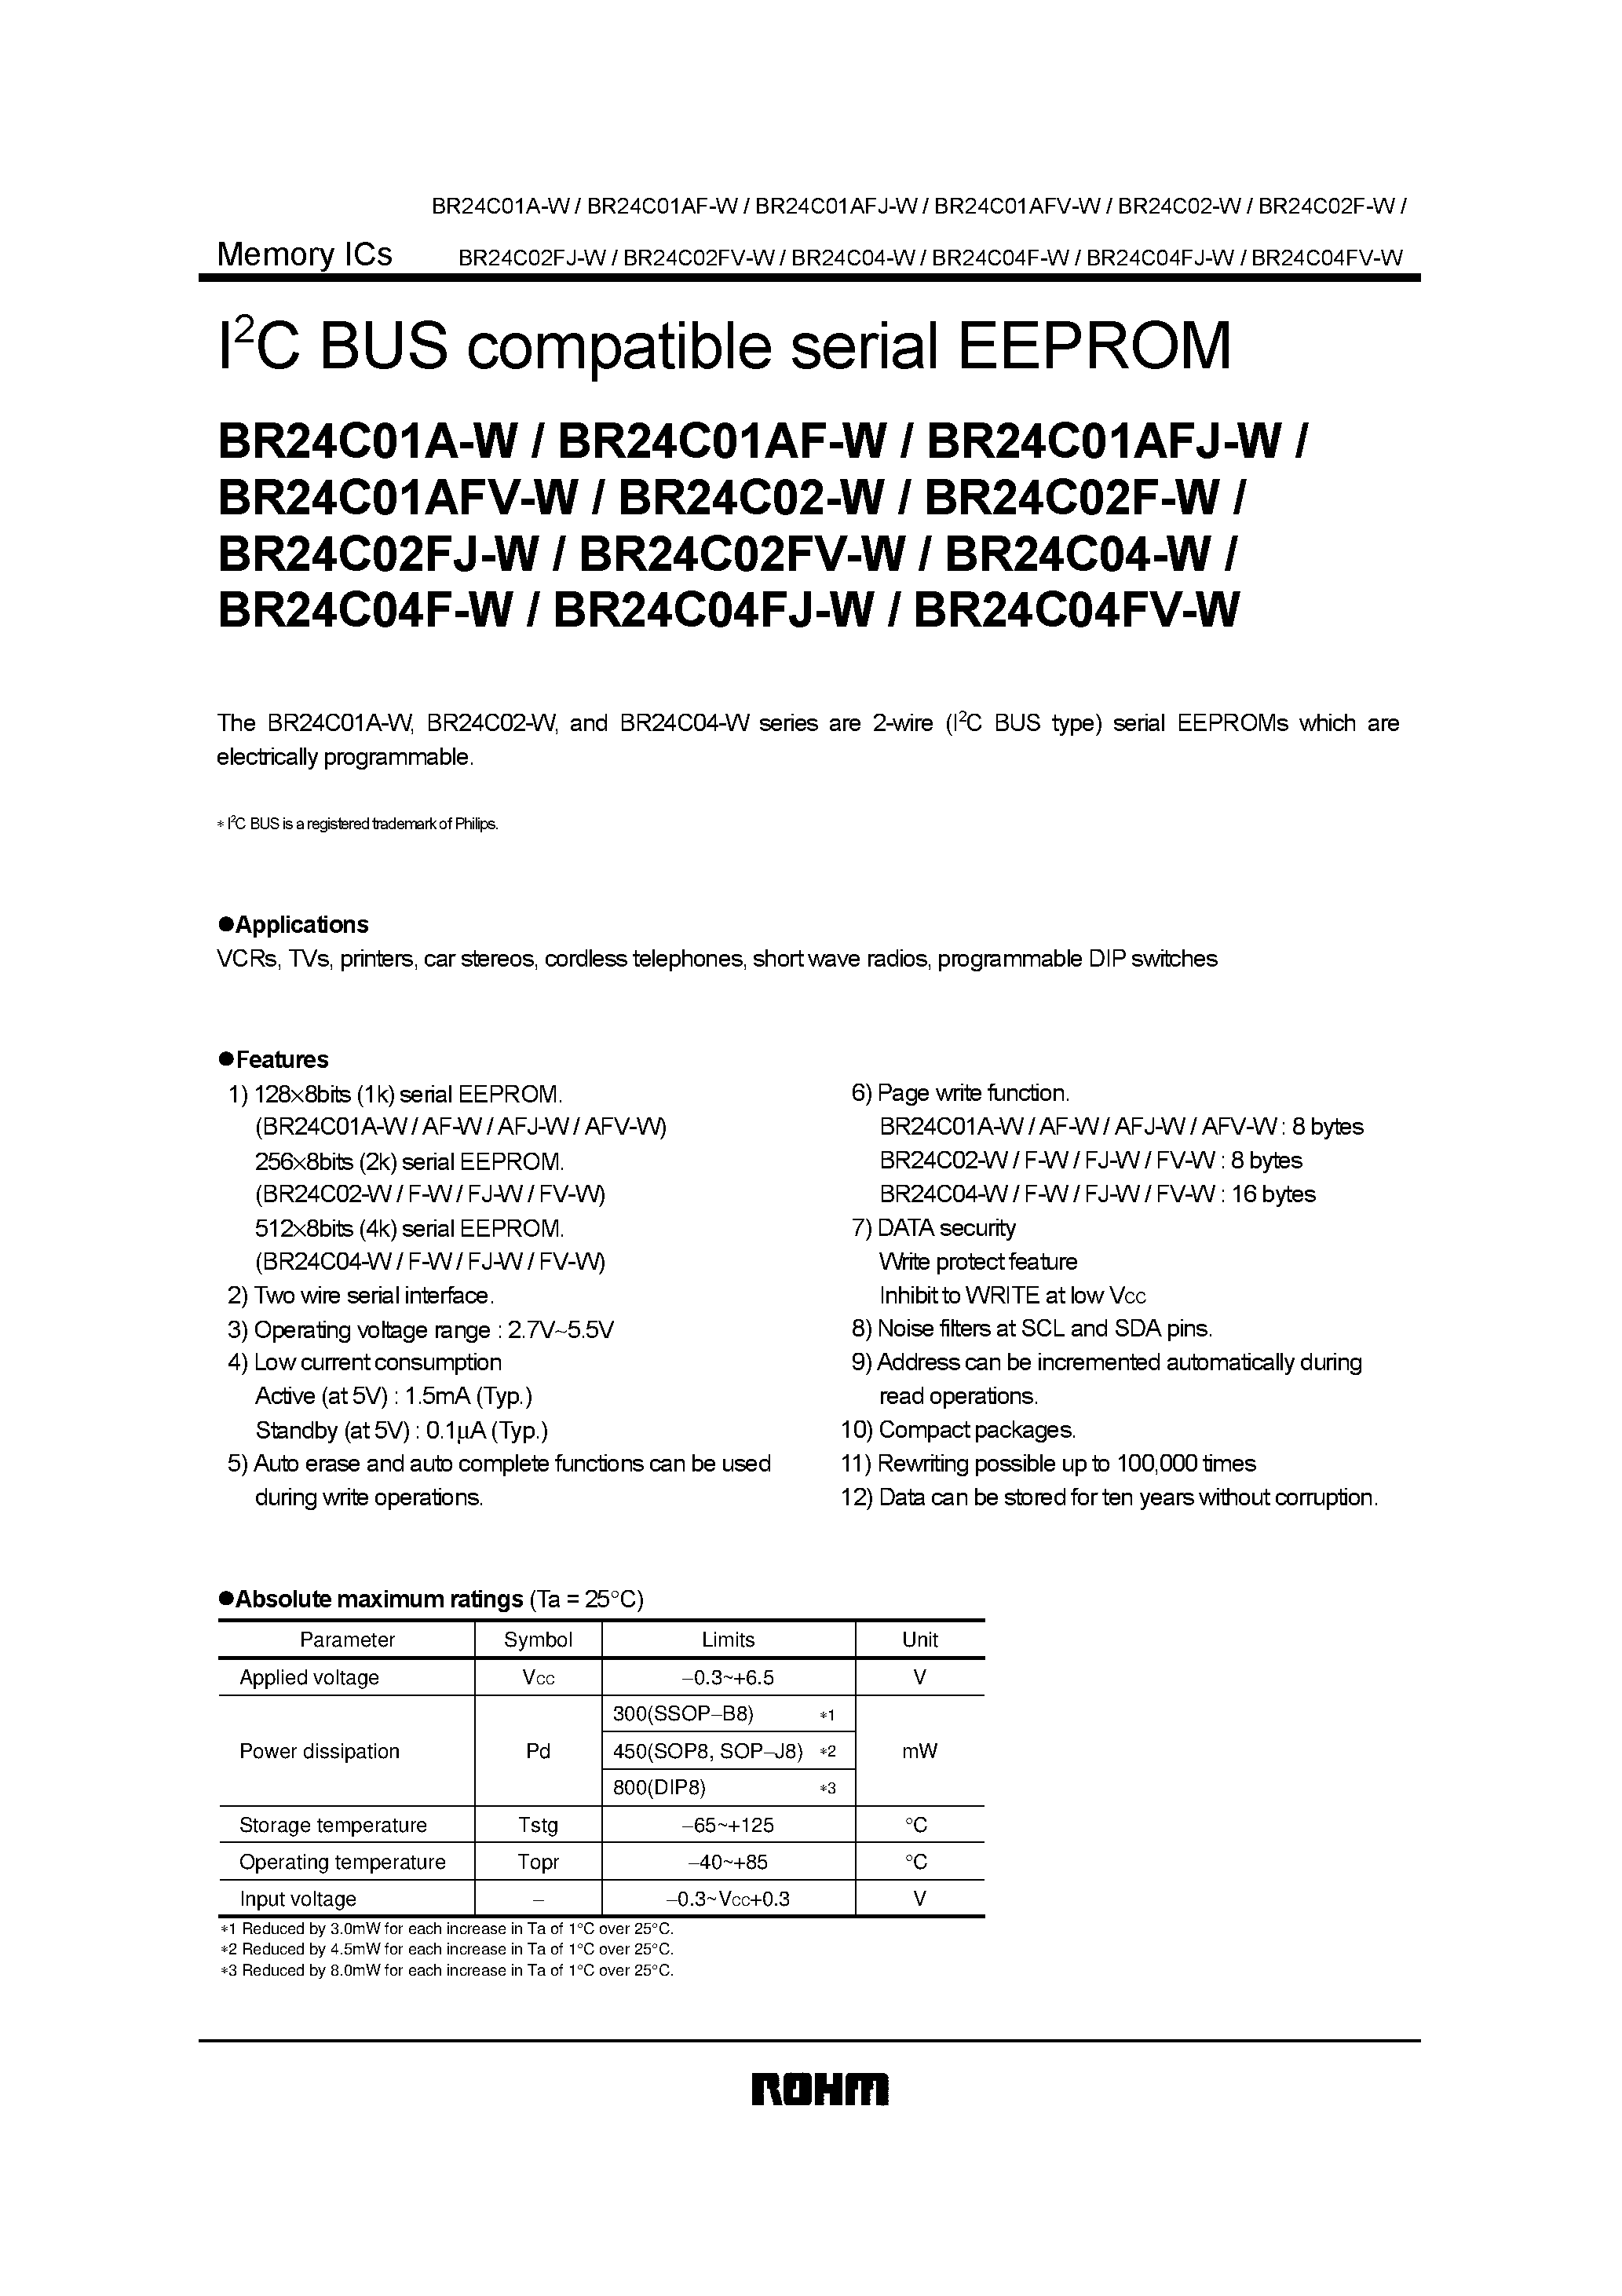 Datasheet BR24C02FJ-W - I2C BUS compatible serial EEPROM page 1